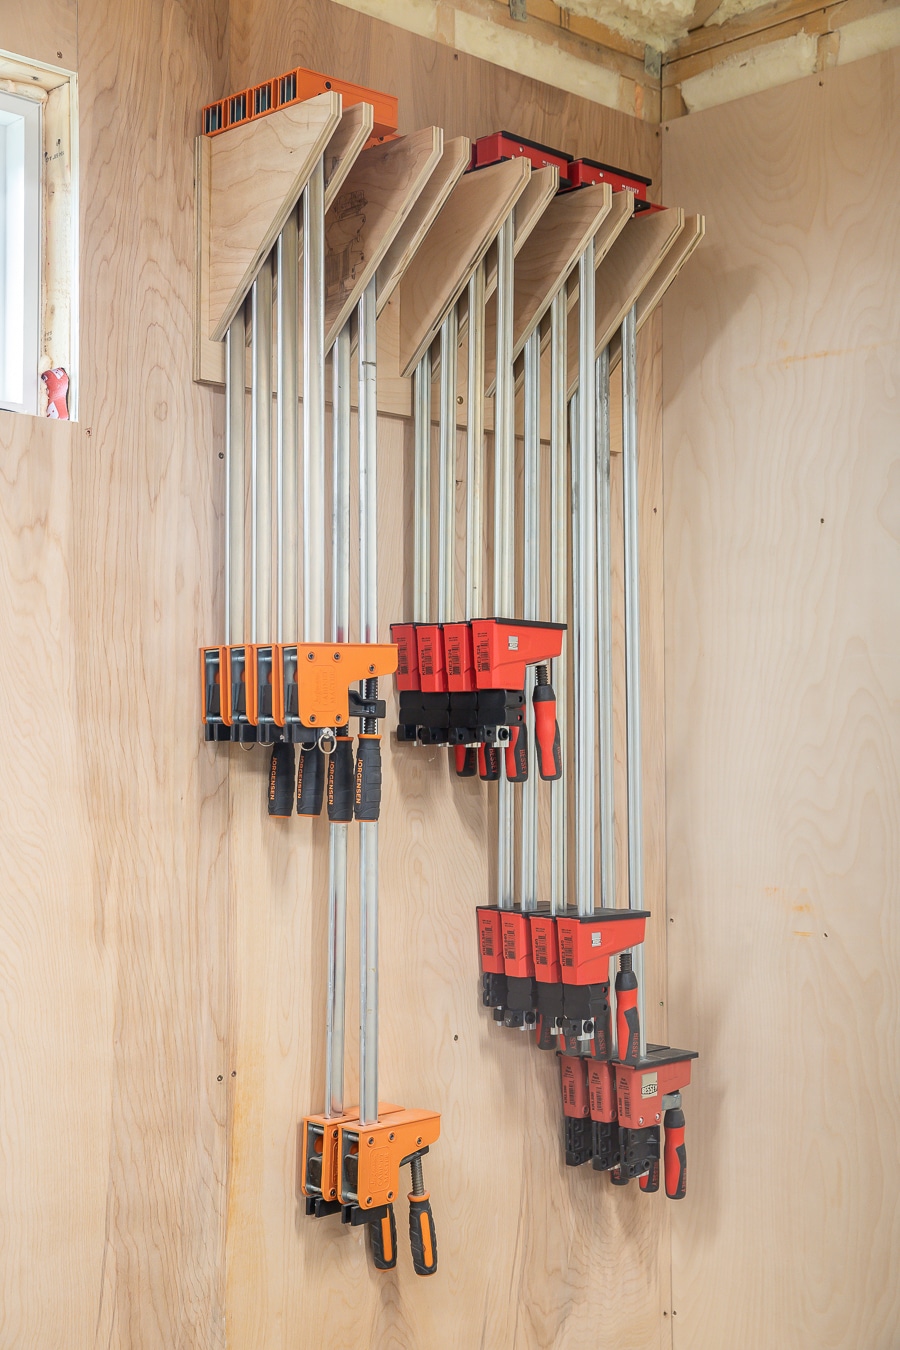 How to build an easy DIY clamp rack from scrap wood